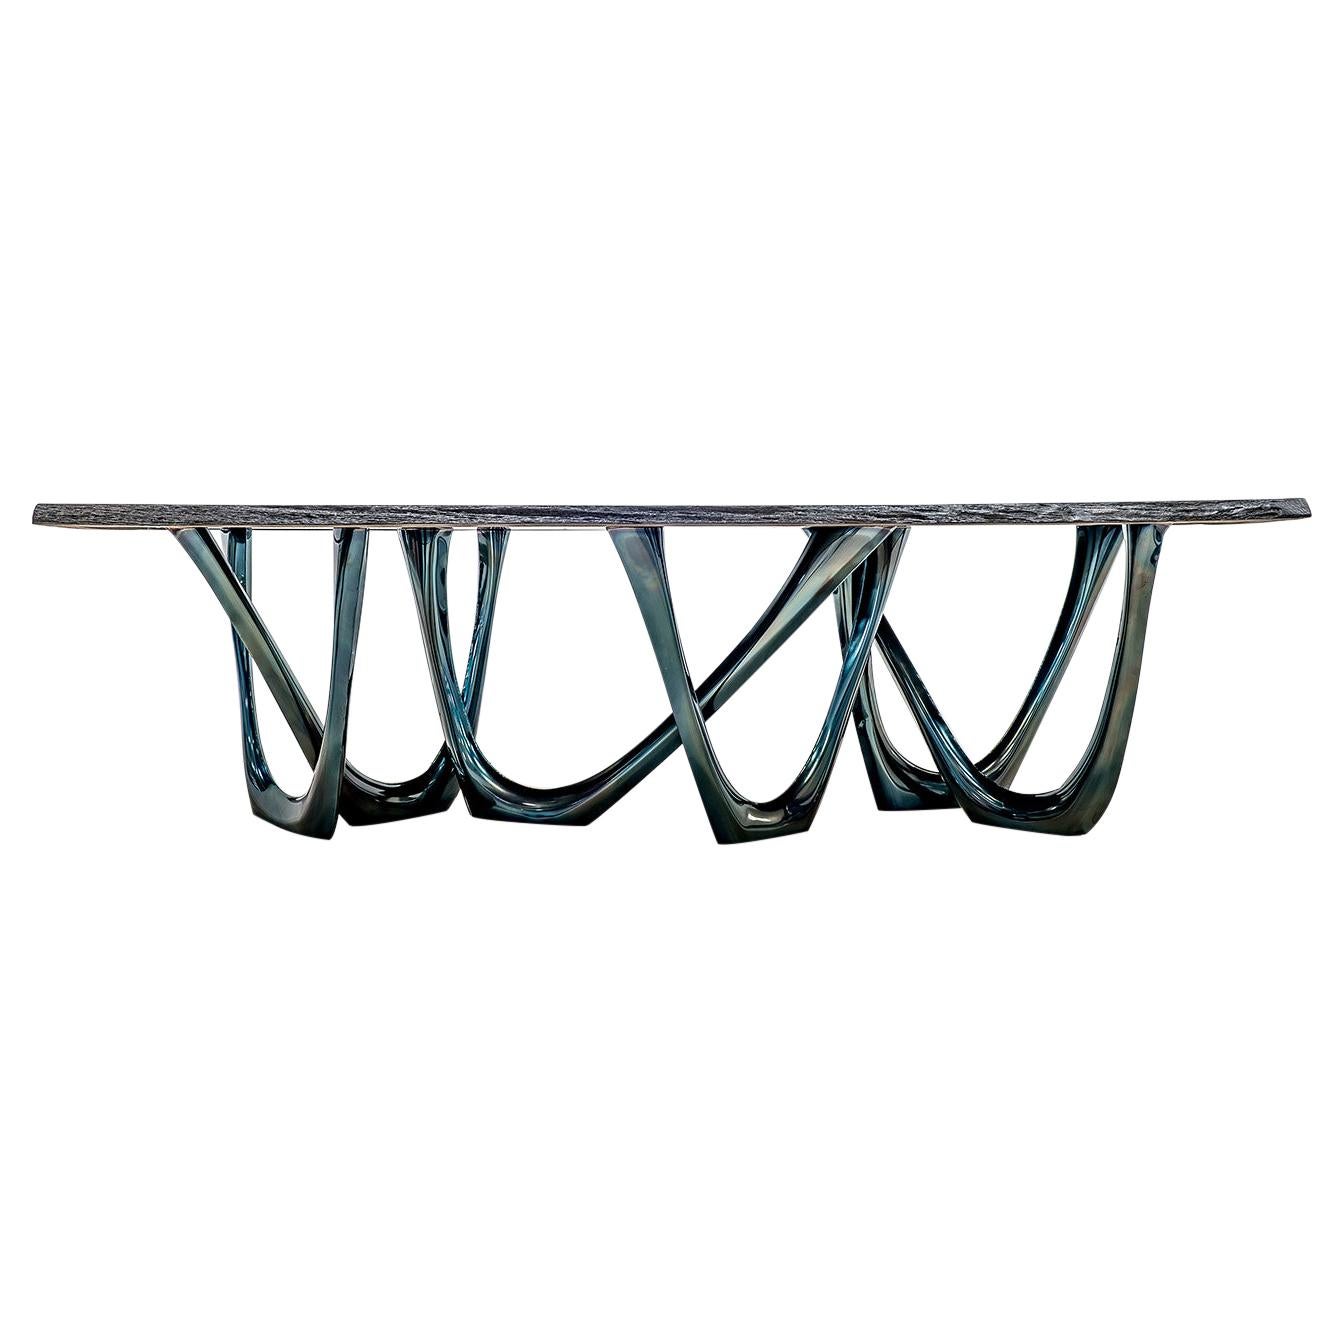 G-Table Cosmos Ancient Oak with Cosmic Blue Carbon Steel Base by Zieta